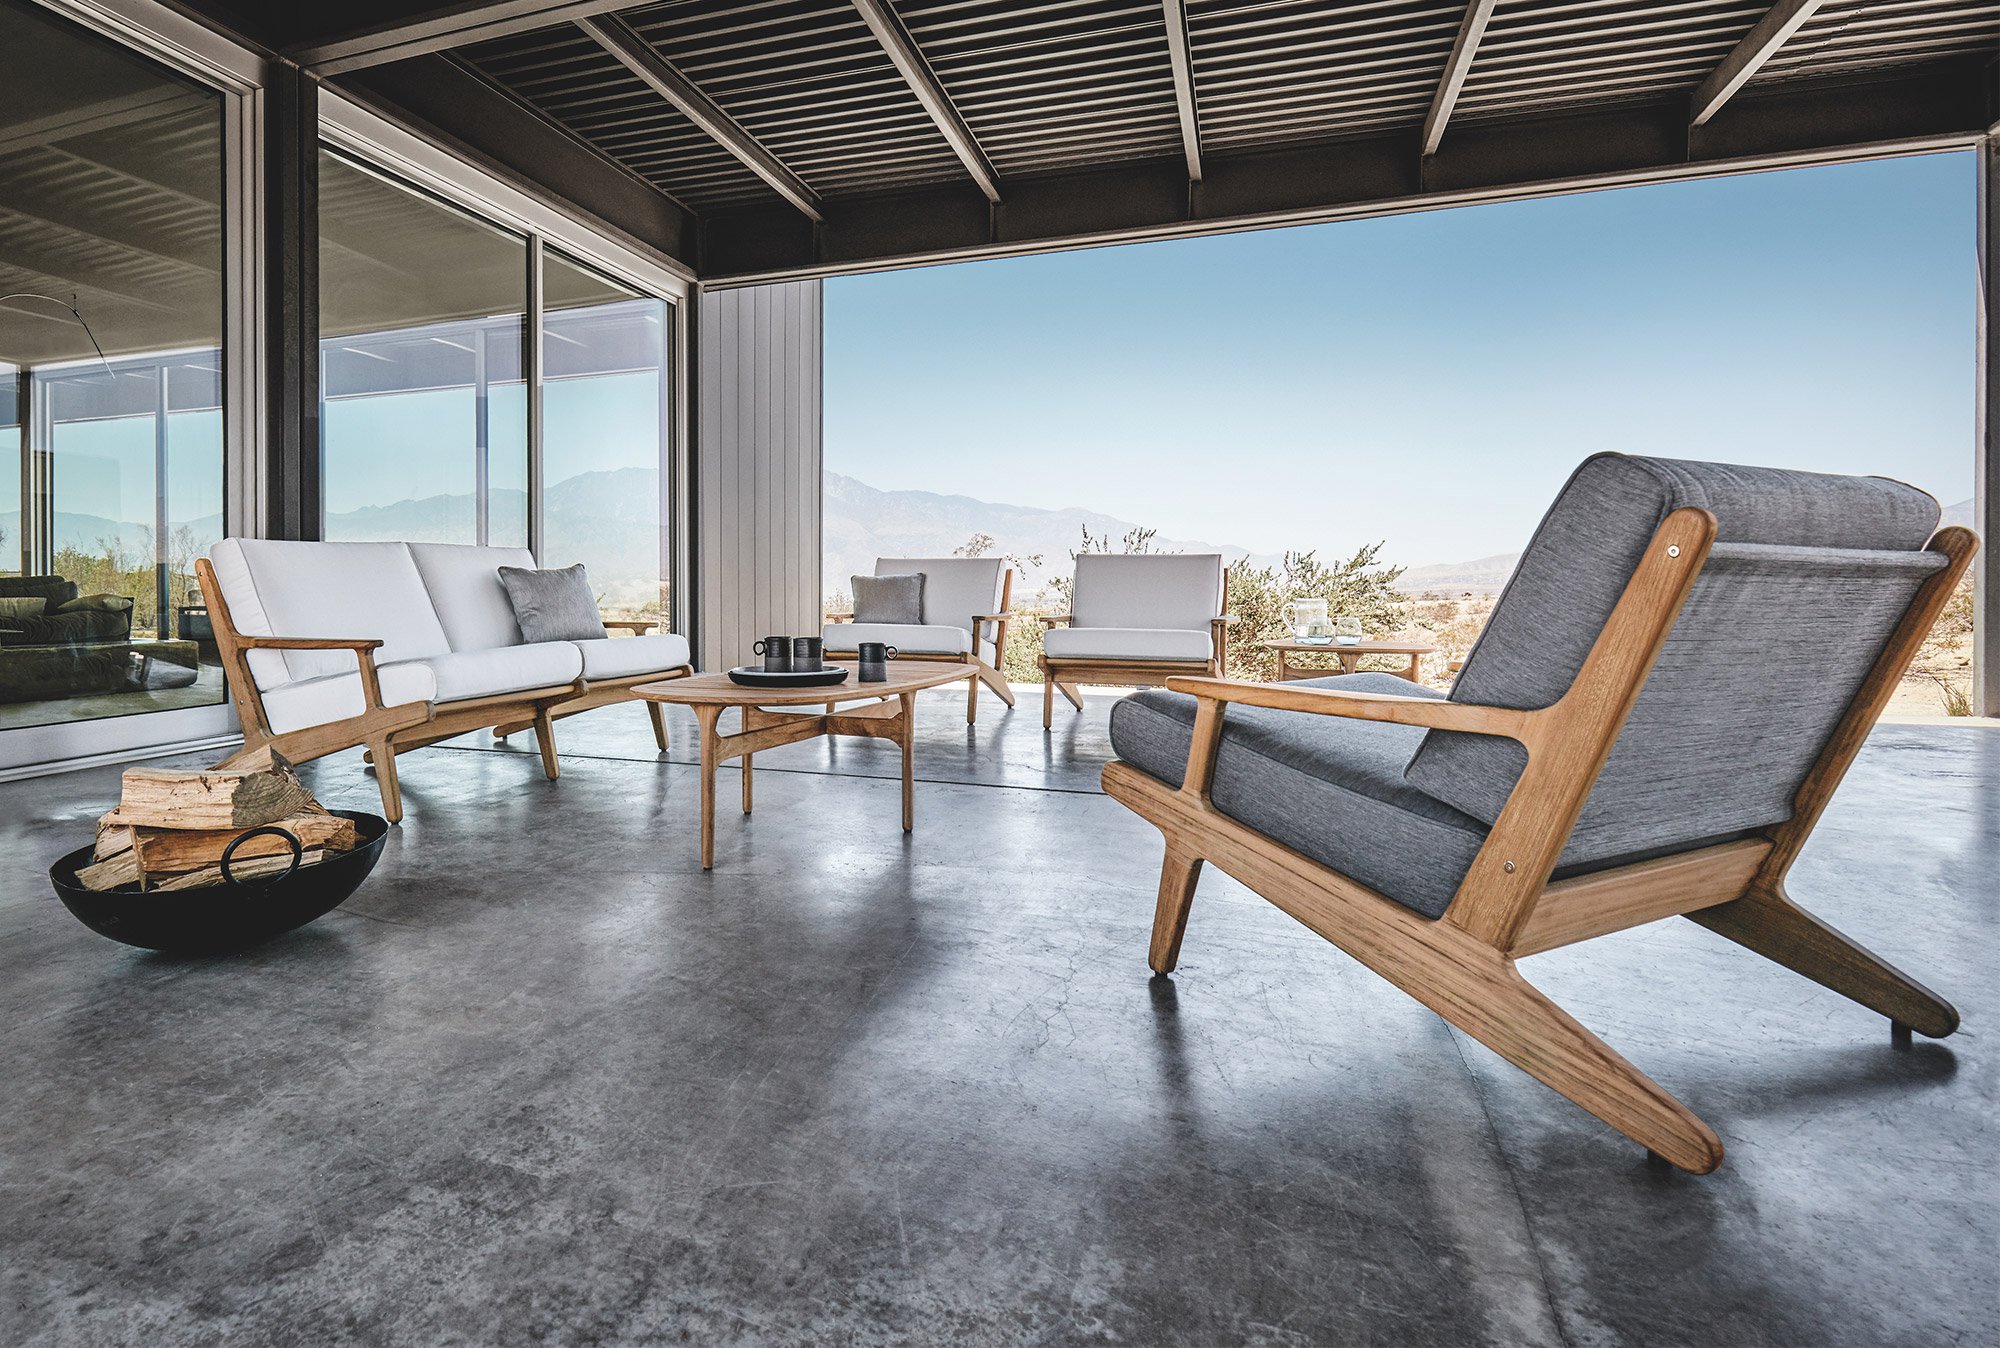 10 Best Outdoor Lounge Chairs In 2018 | Ҿ